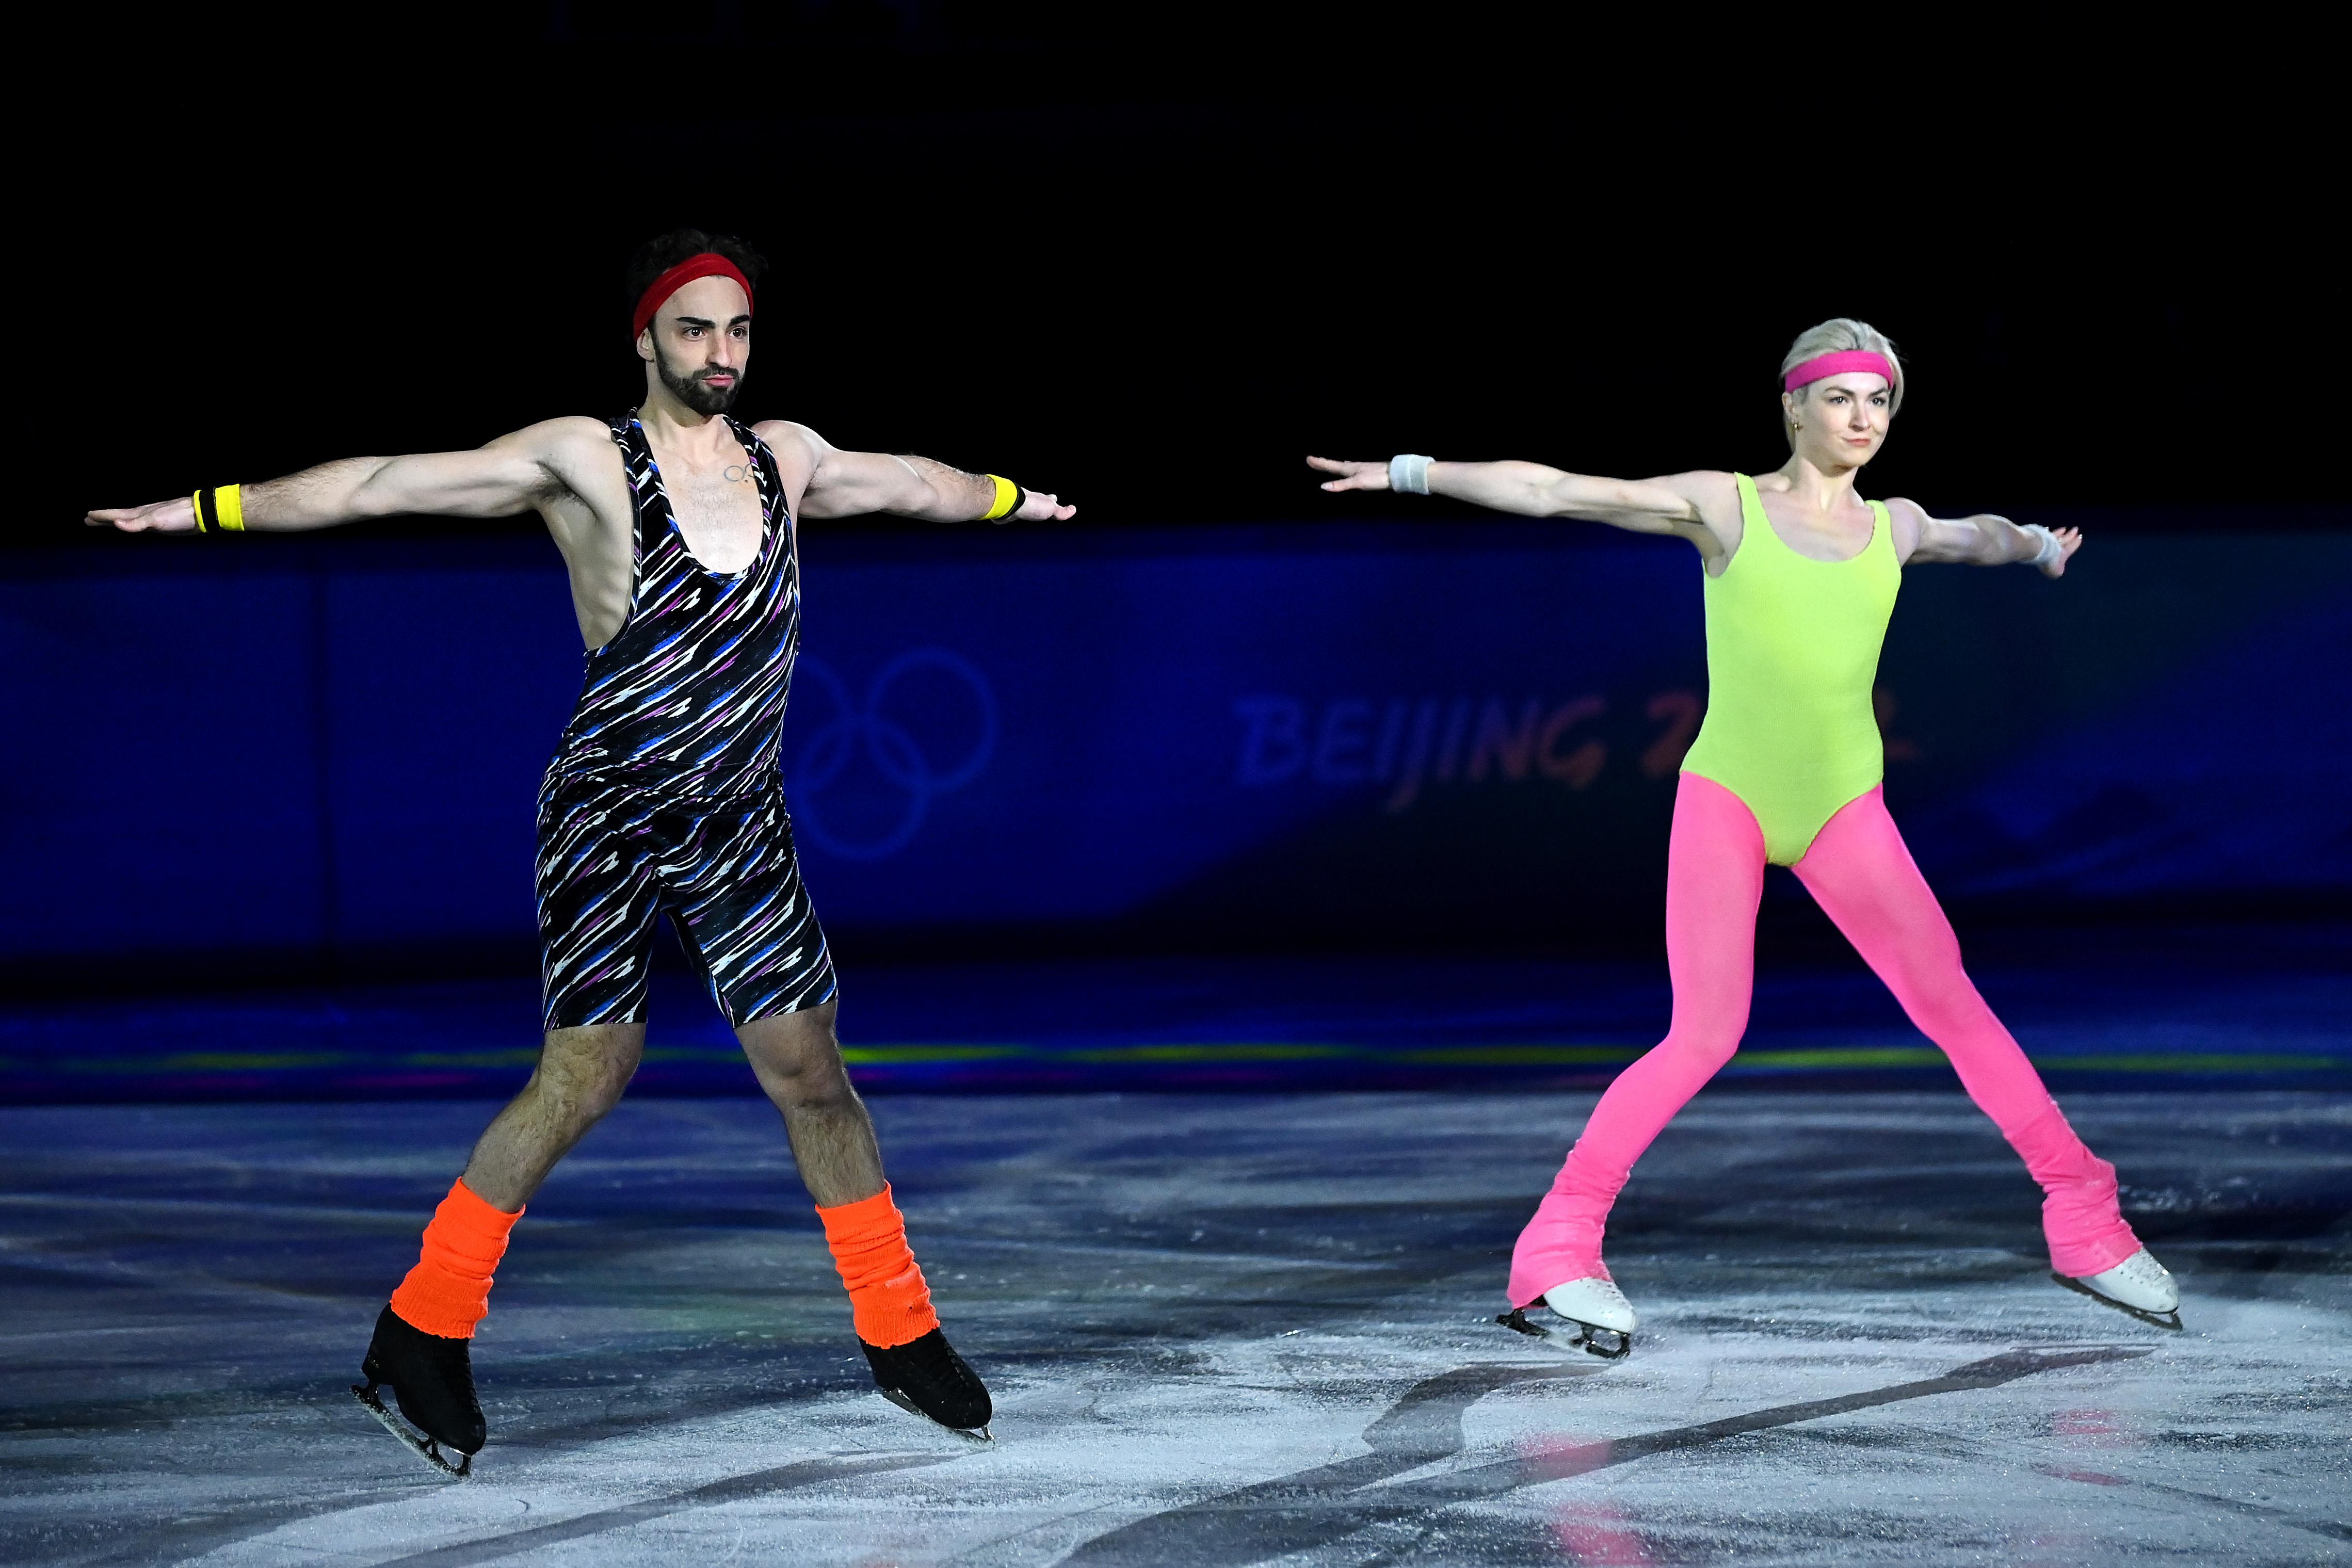 The couple in 80s fitness outfits, man in leotard woman in neon leggings and top, both in ankle warmers and headbands, with their arms outstretched in unison to the side